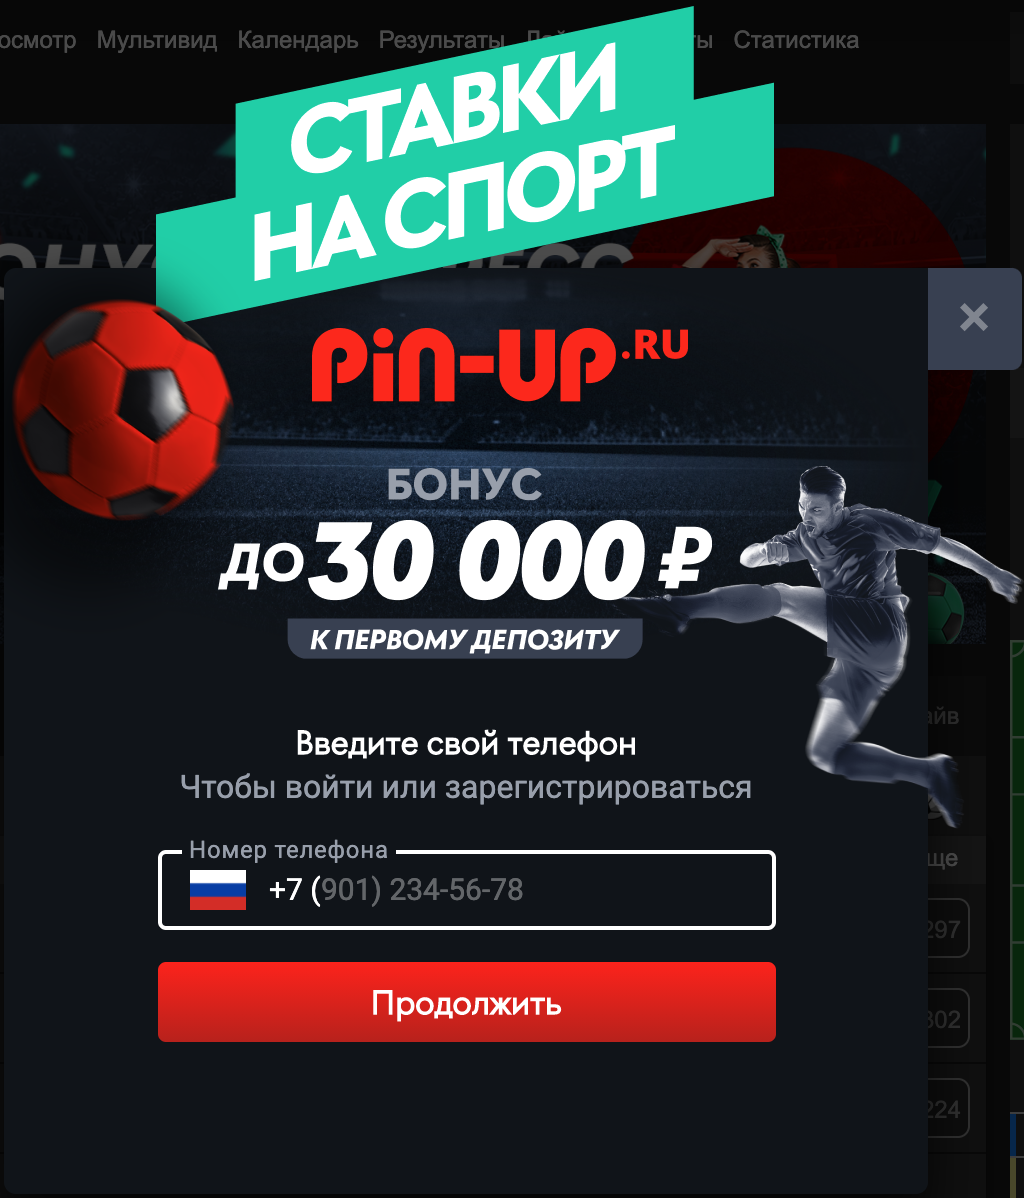 How Much Do You Charge For пинап